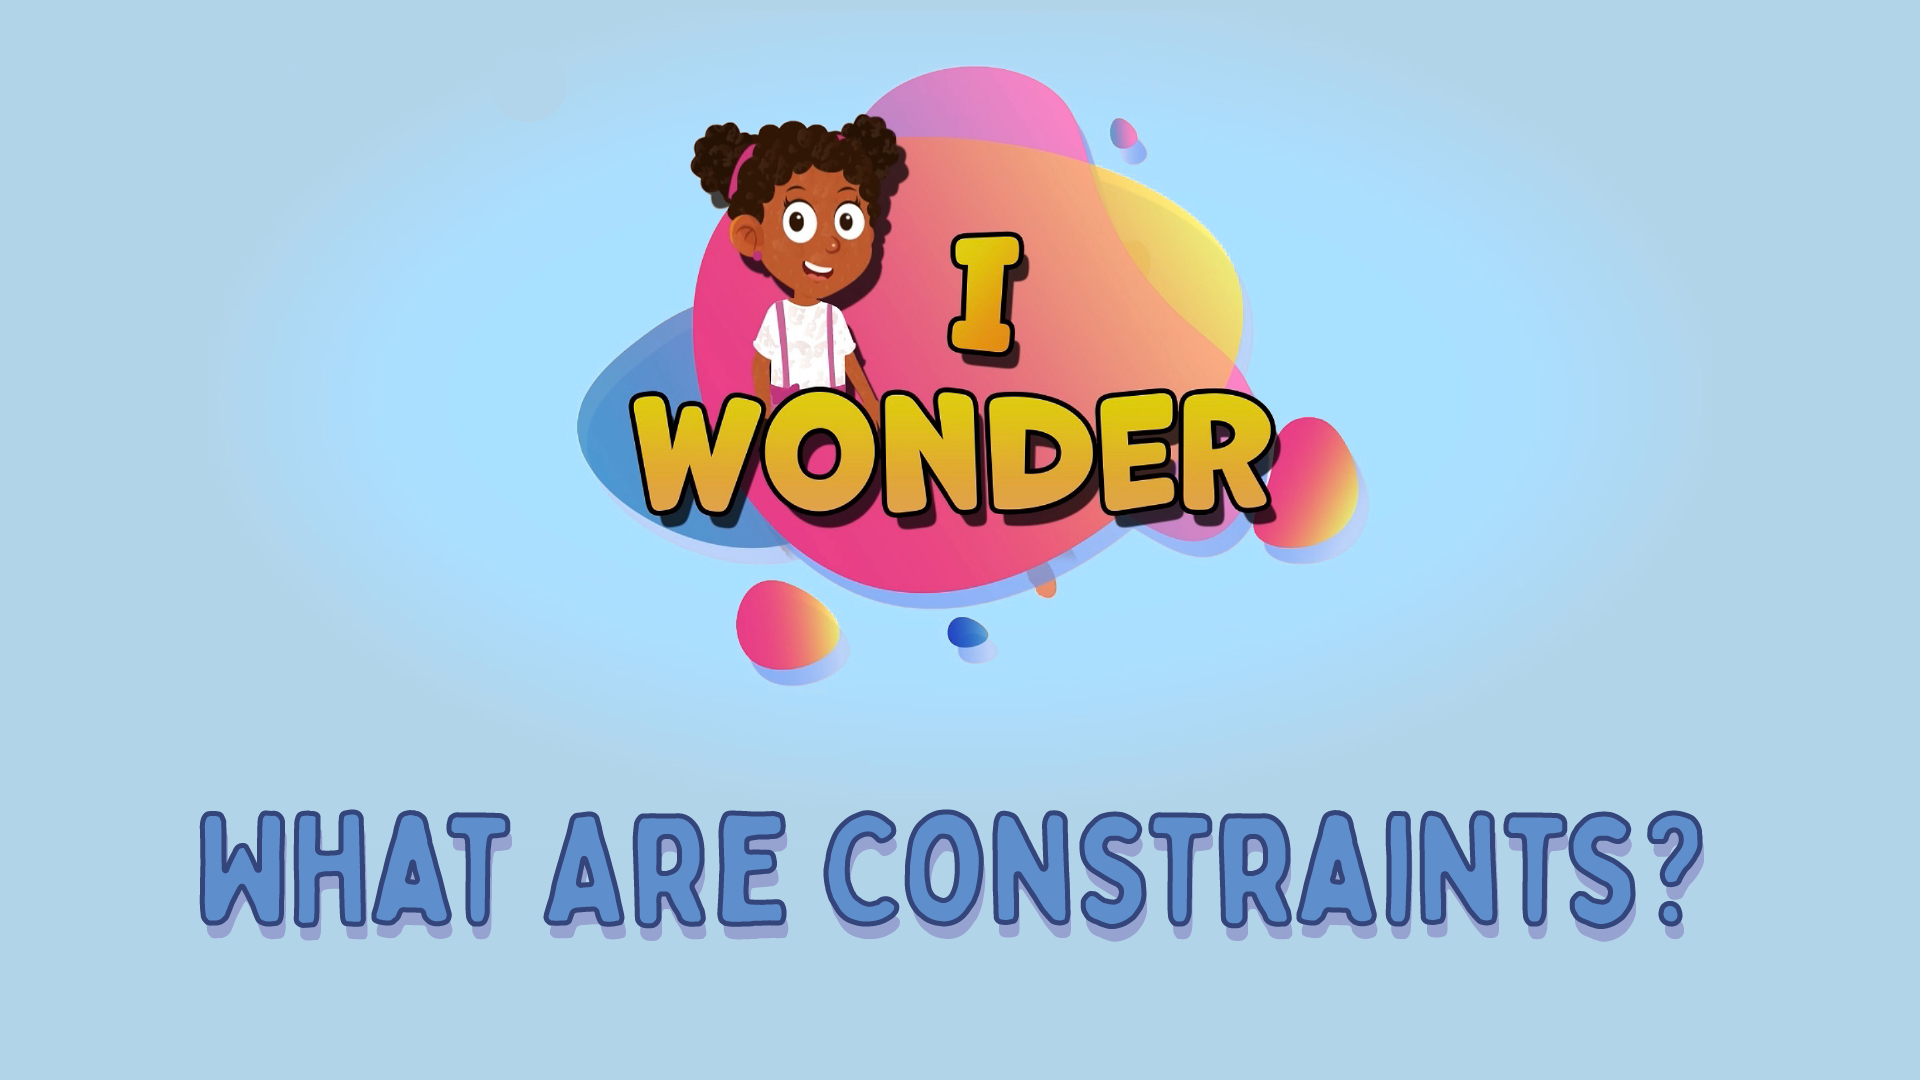 What Are Constraints?